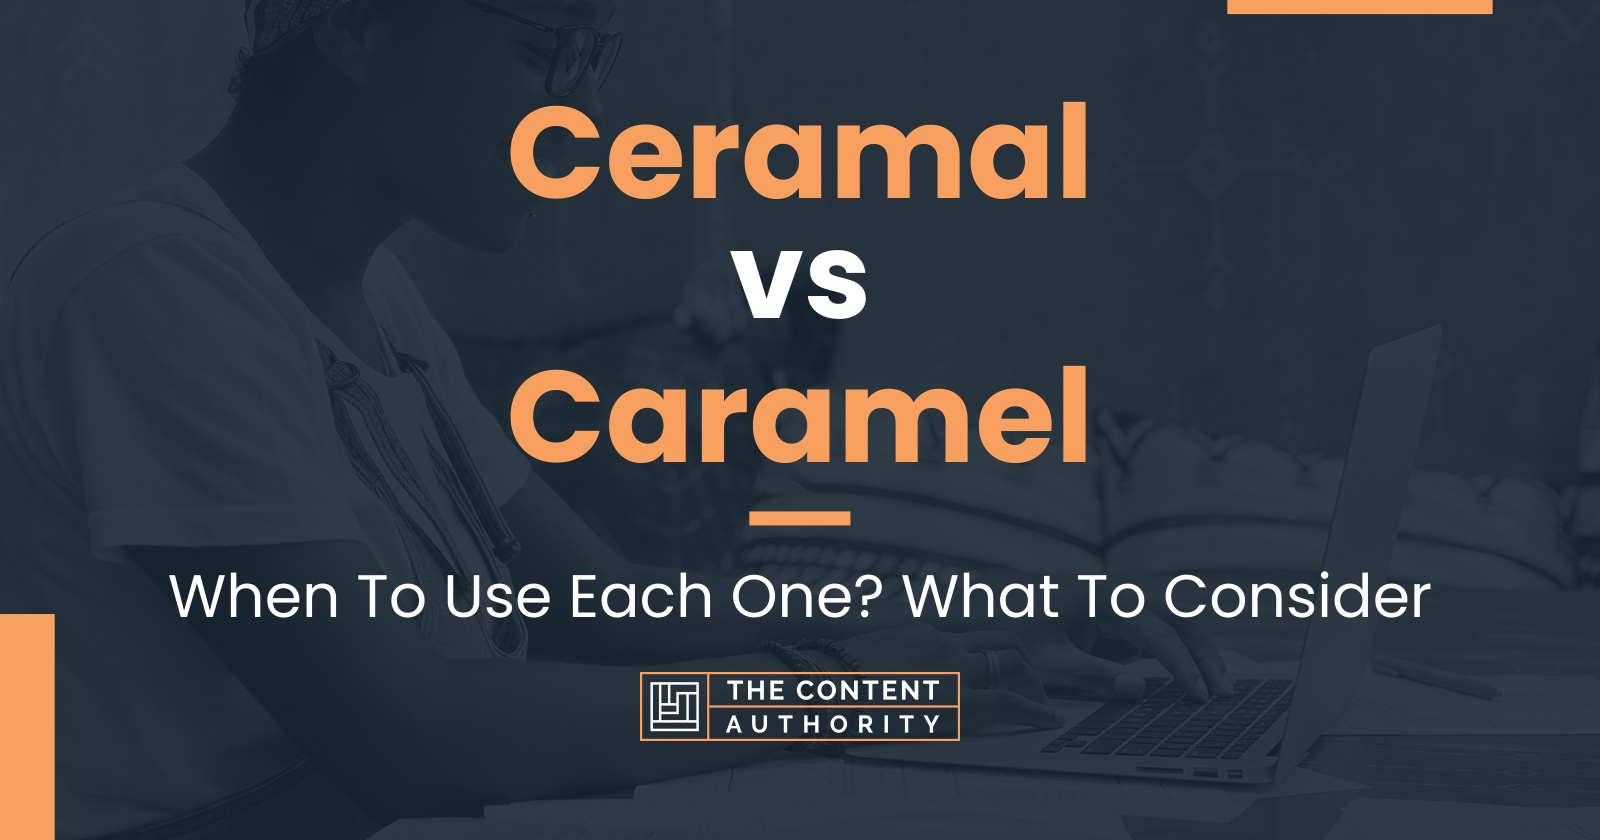 Ceramal vs Caramel: When To Use Each One? What To Consider